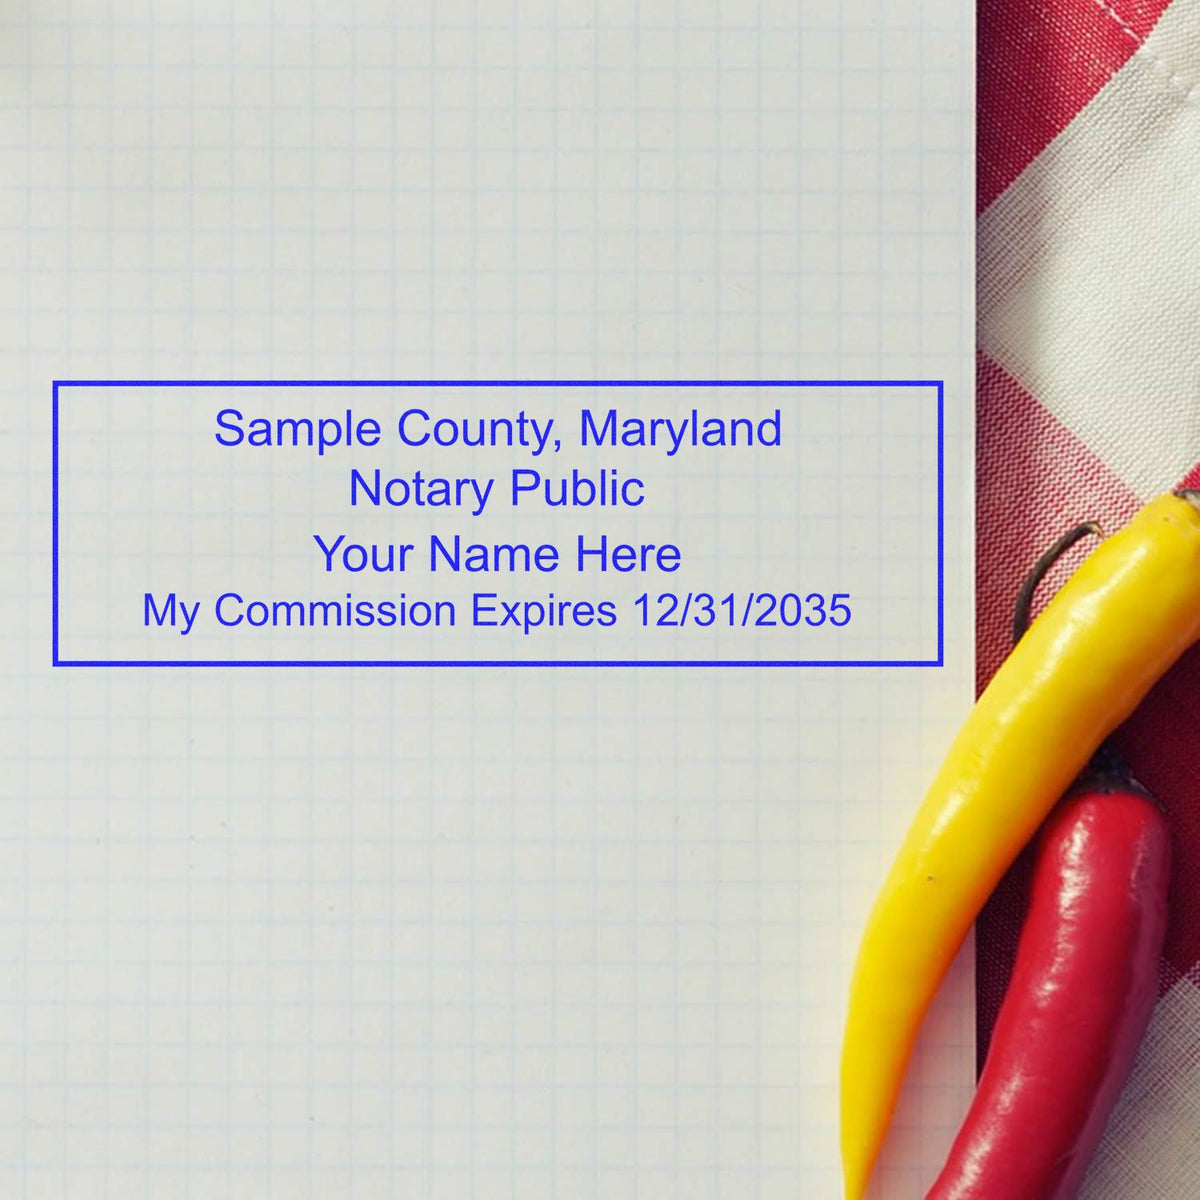 This paper is stamped with a sample imprint of the Slim Pre-Inked Rectangular Notary Stamp for Maryland, signifying its quality and reliability.